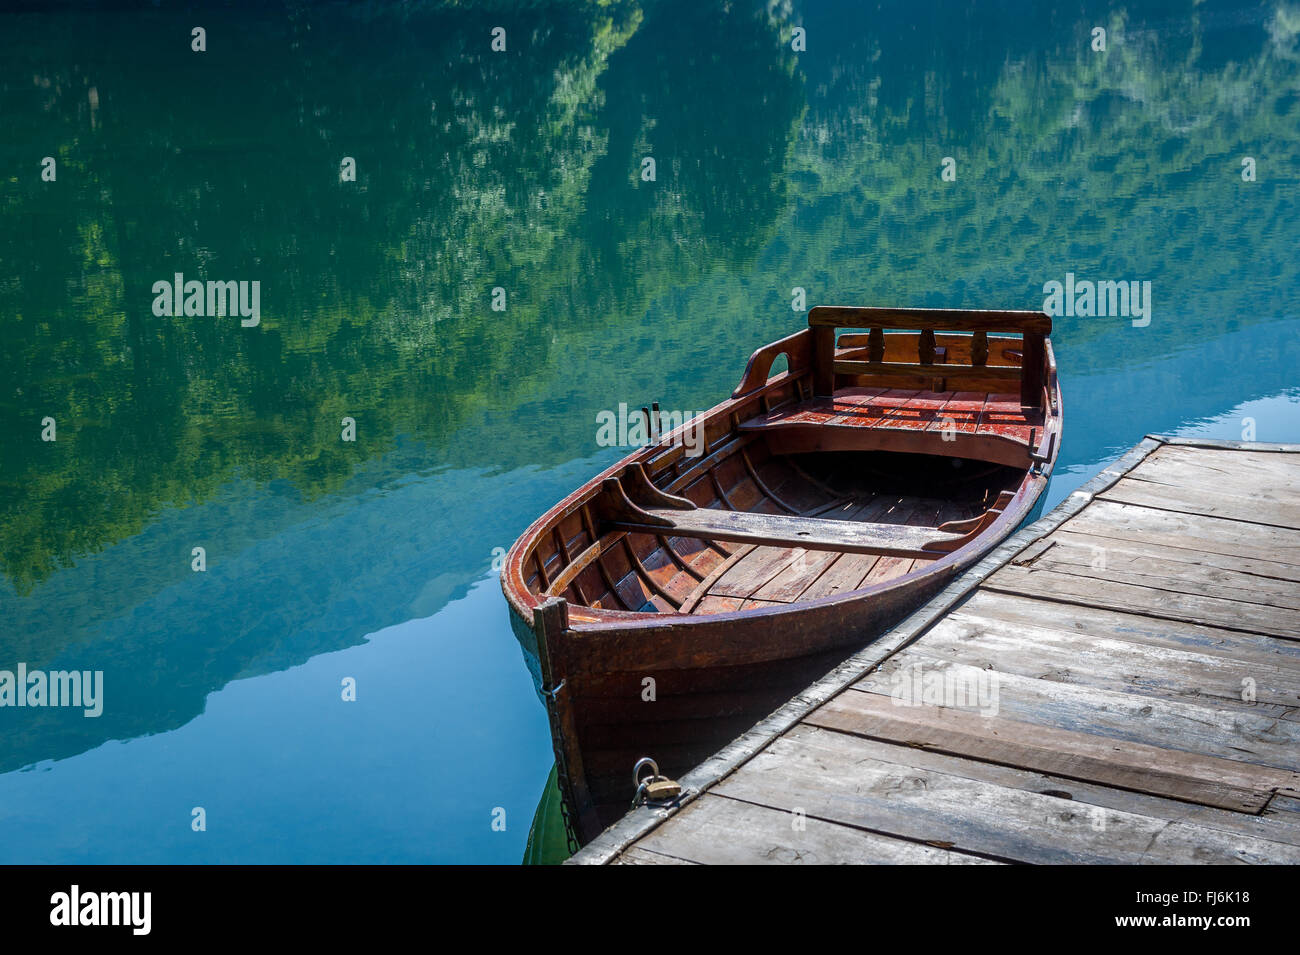 Wooden boat, sky and forest reflected in the mirror lake water Stock Photo